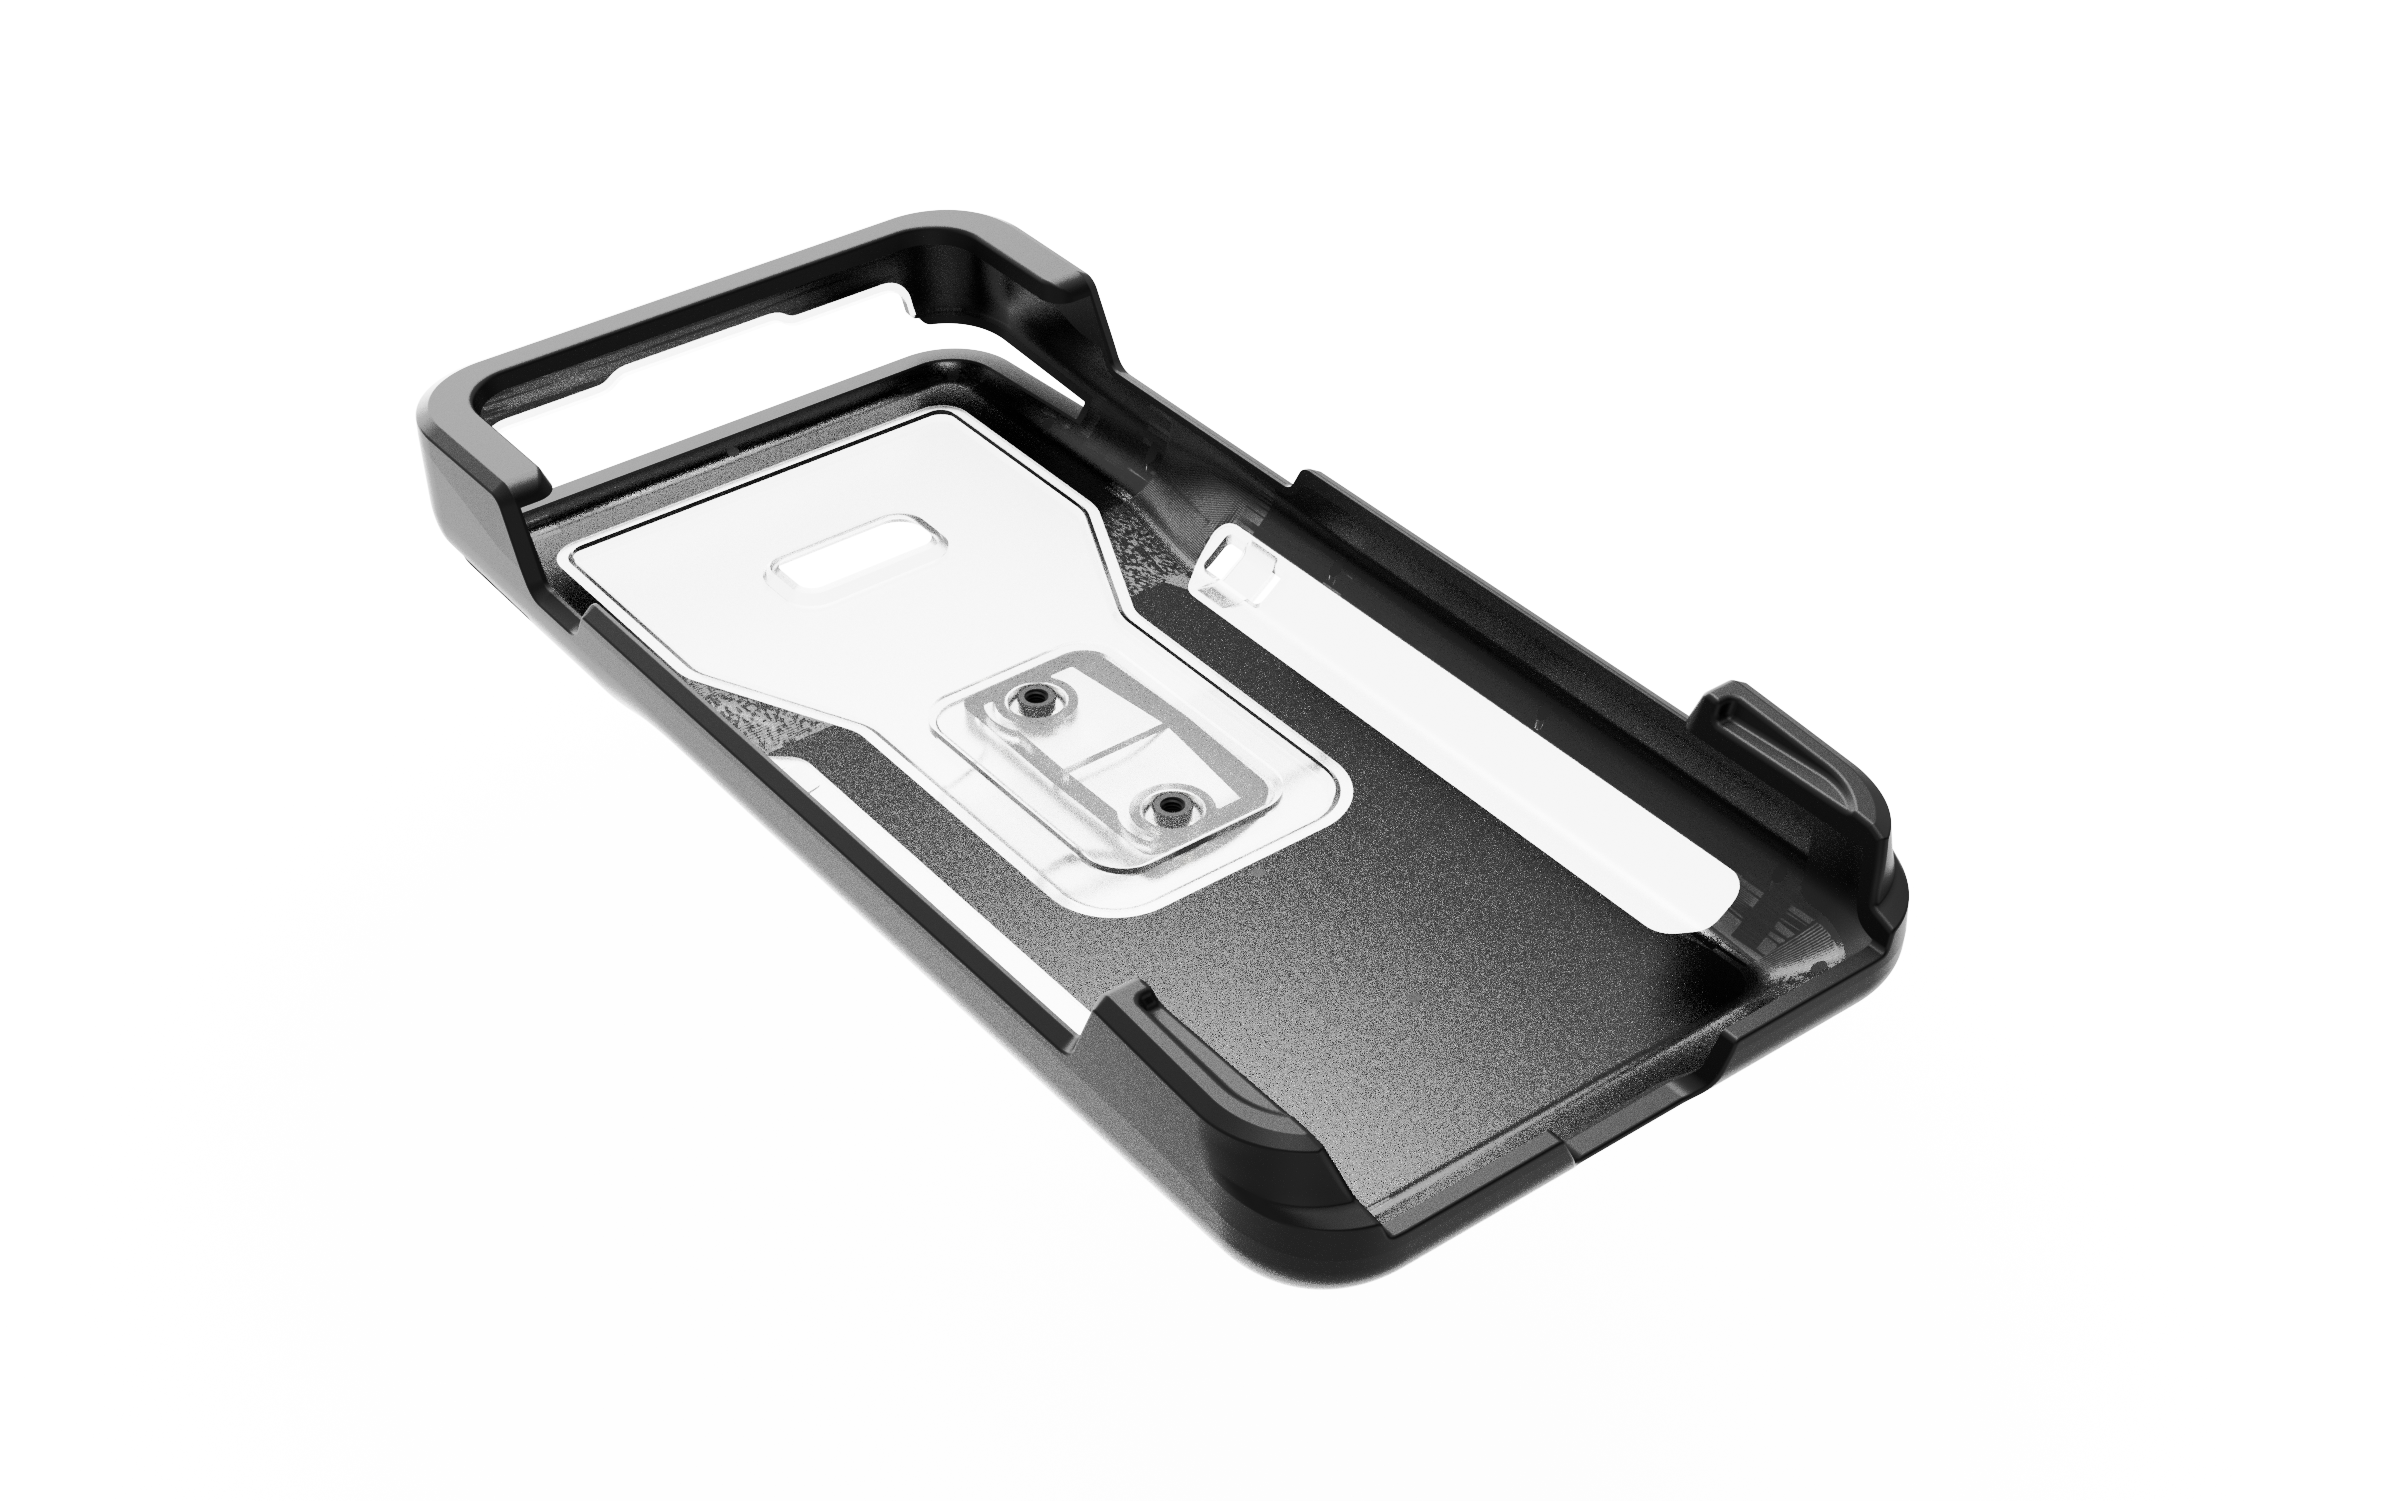 Mobile Protect & Go Case with Belt Clip for Pax A77 Mobile Payment Device